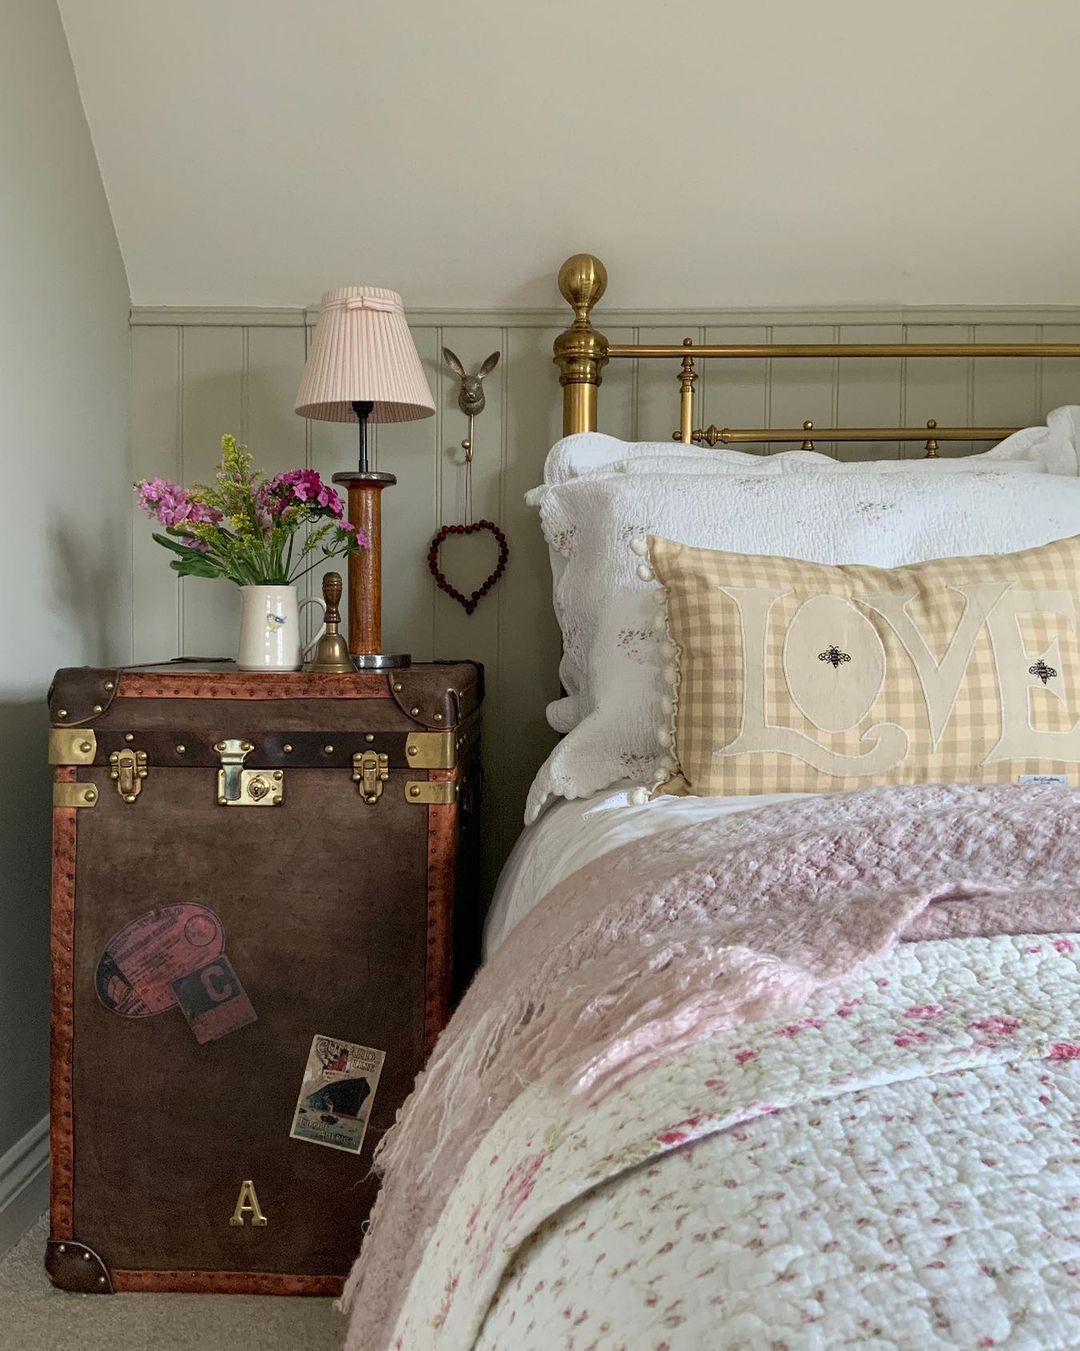 Vintage Bedroom Set with Luggage for Side Table. Photo by Instagram user @mimis_country_escape